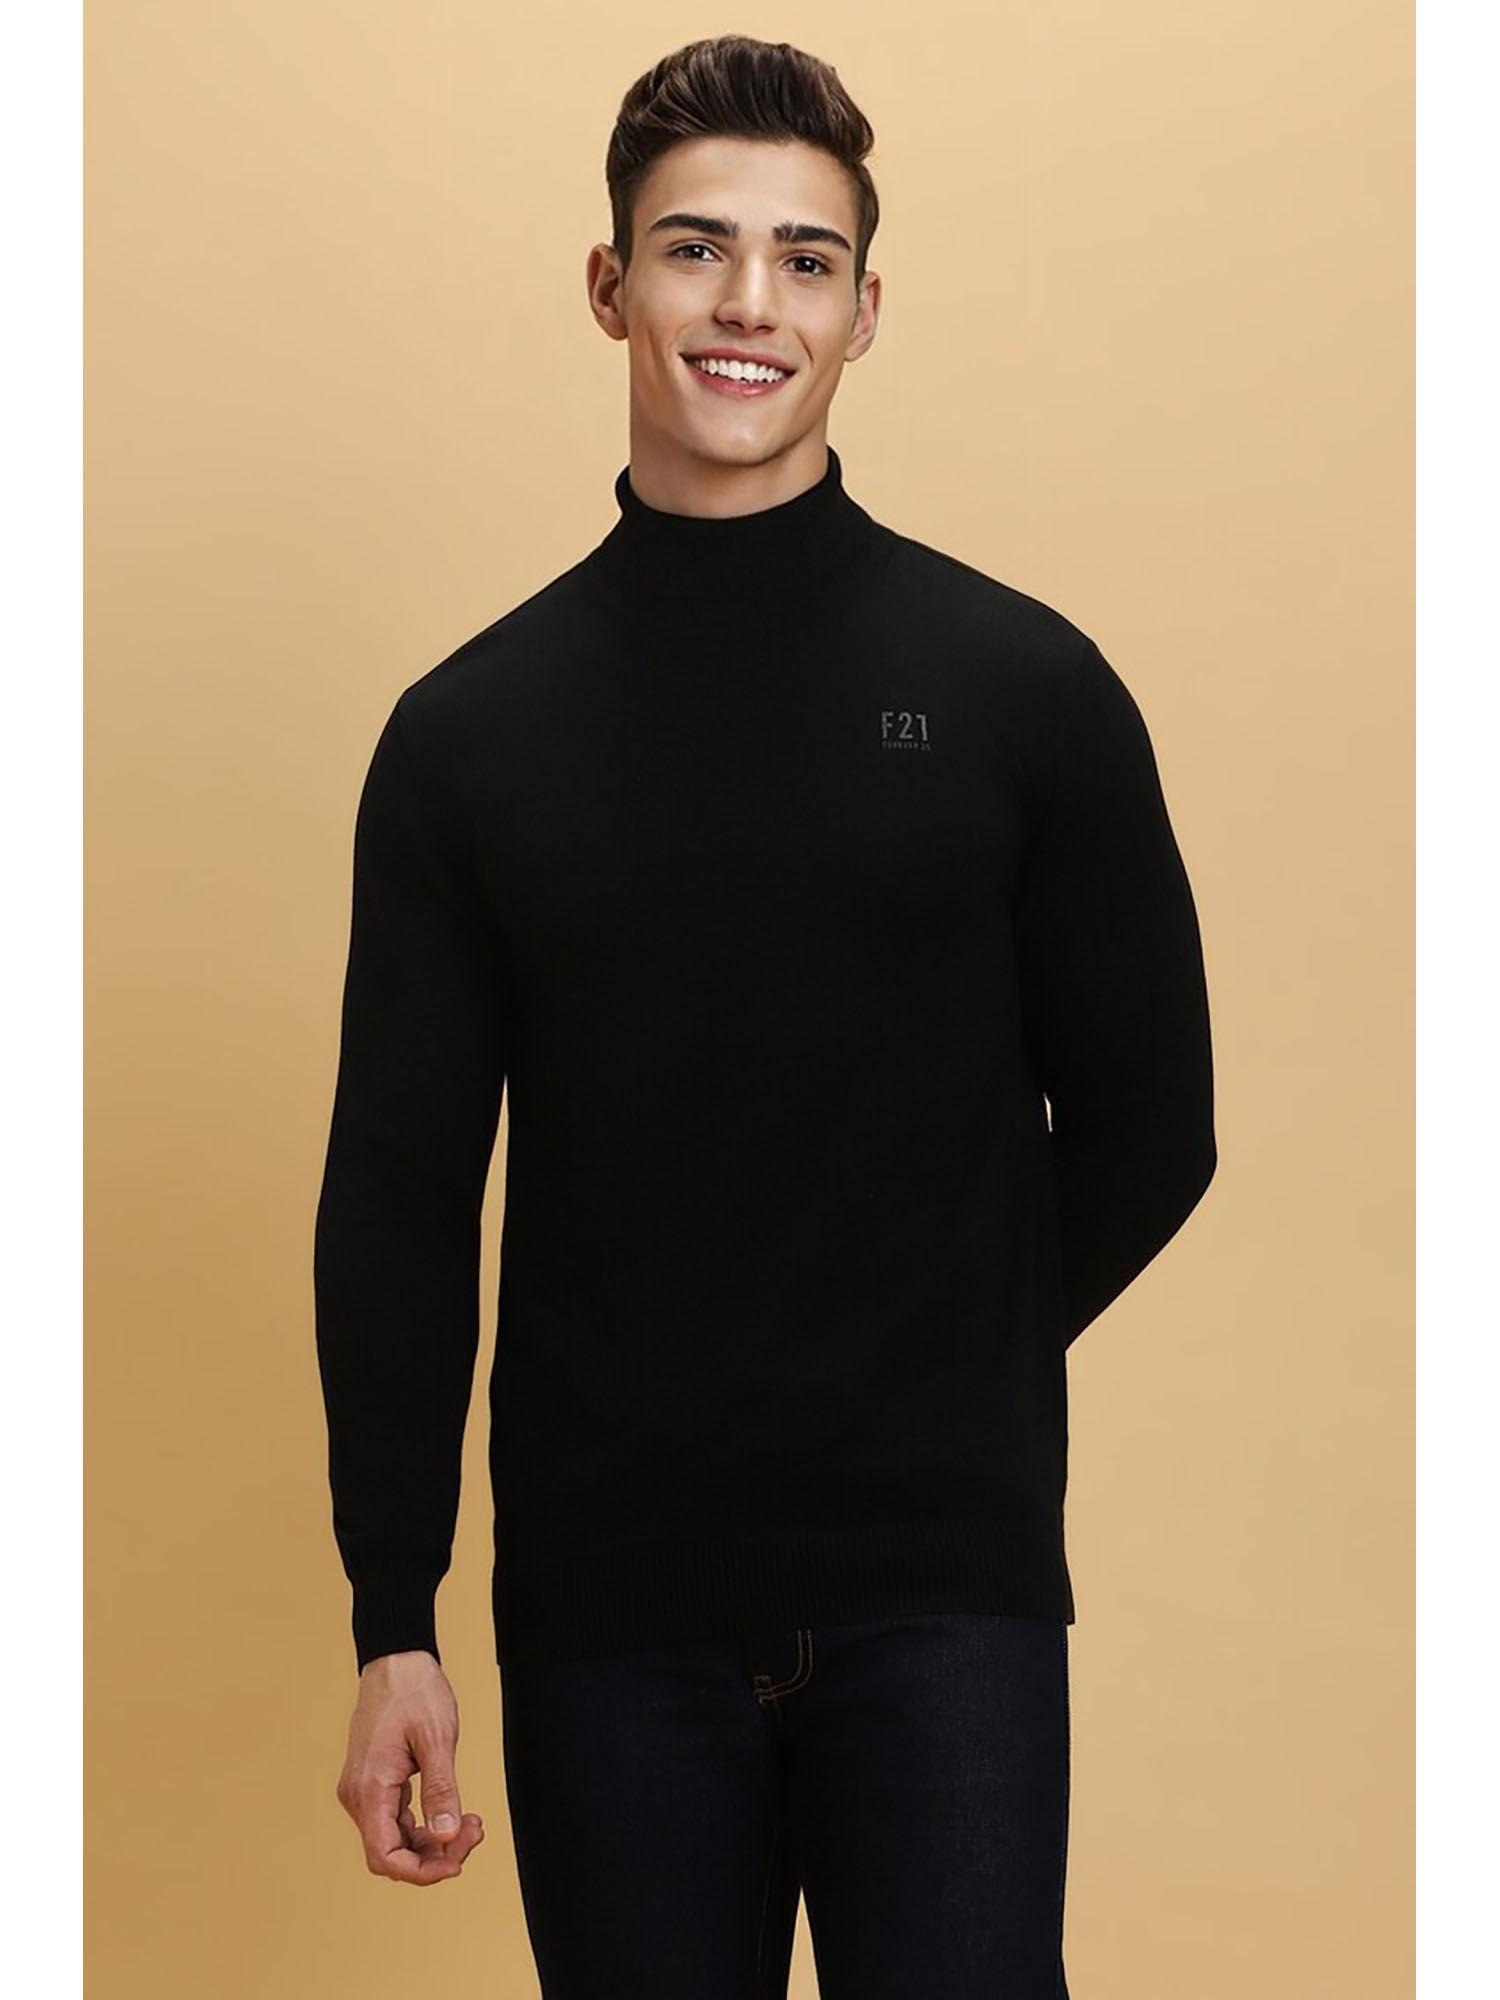 solid black sweater